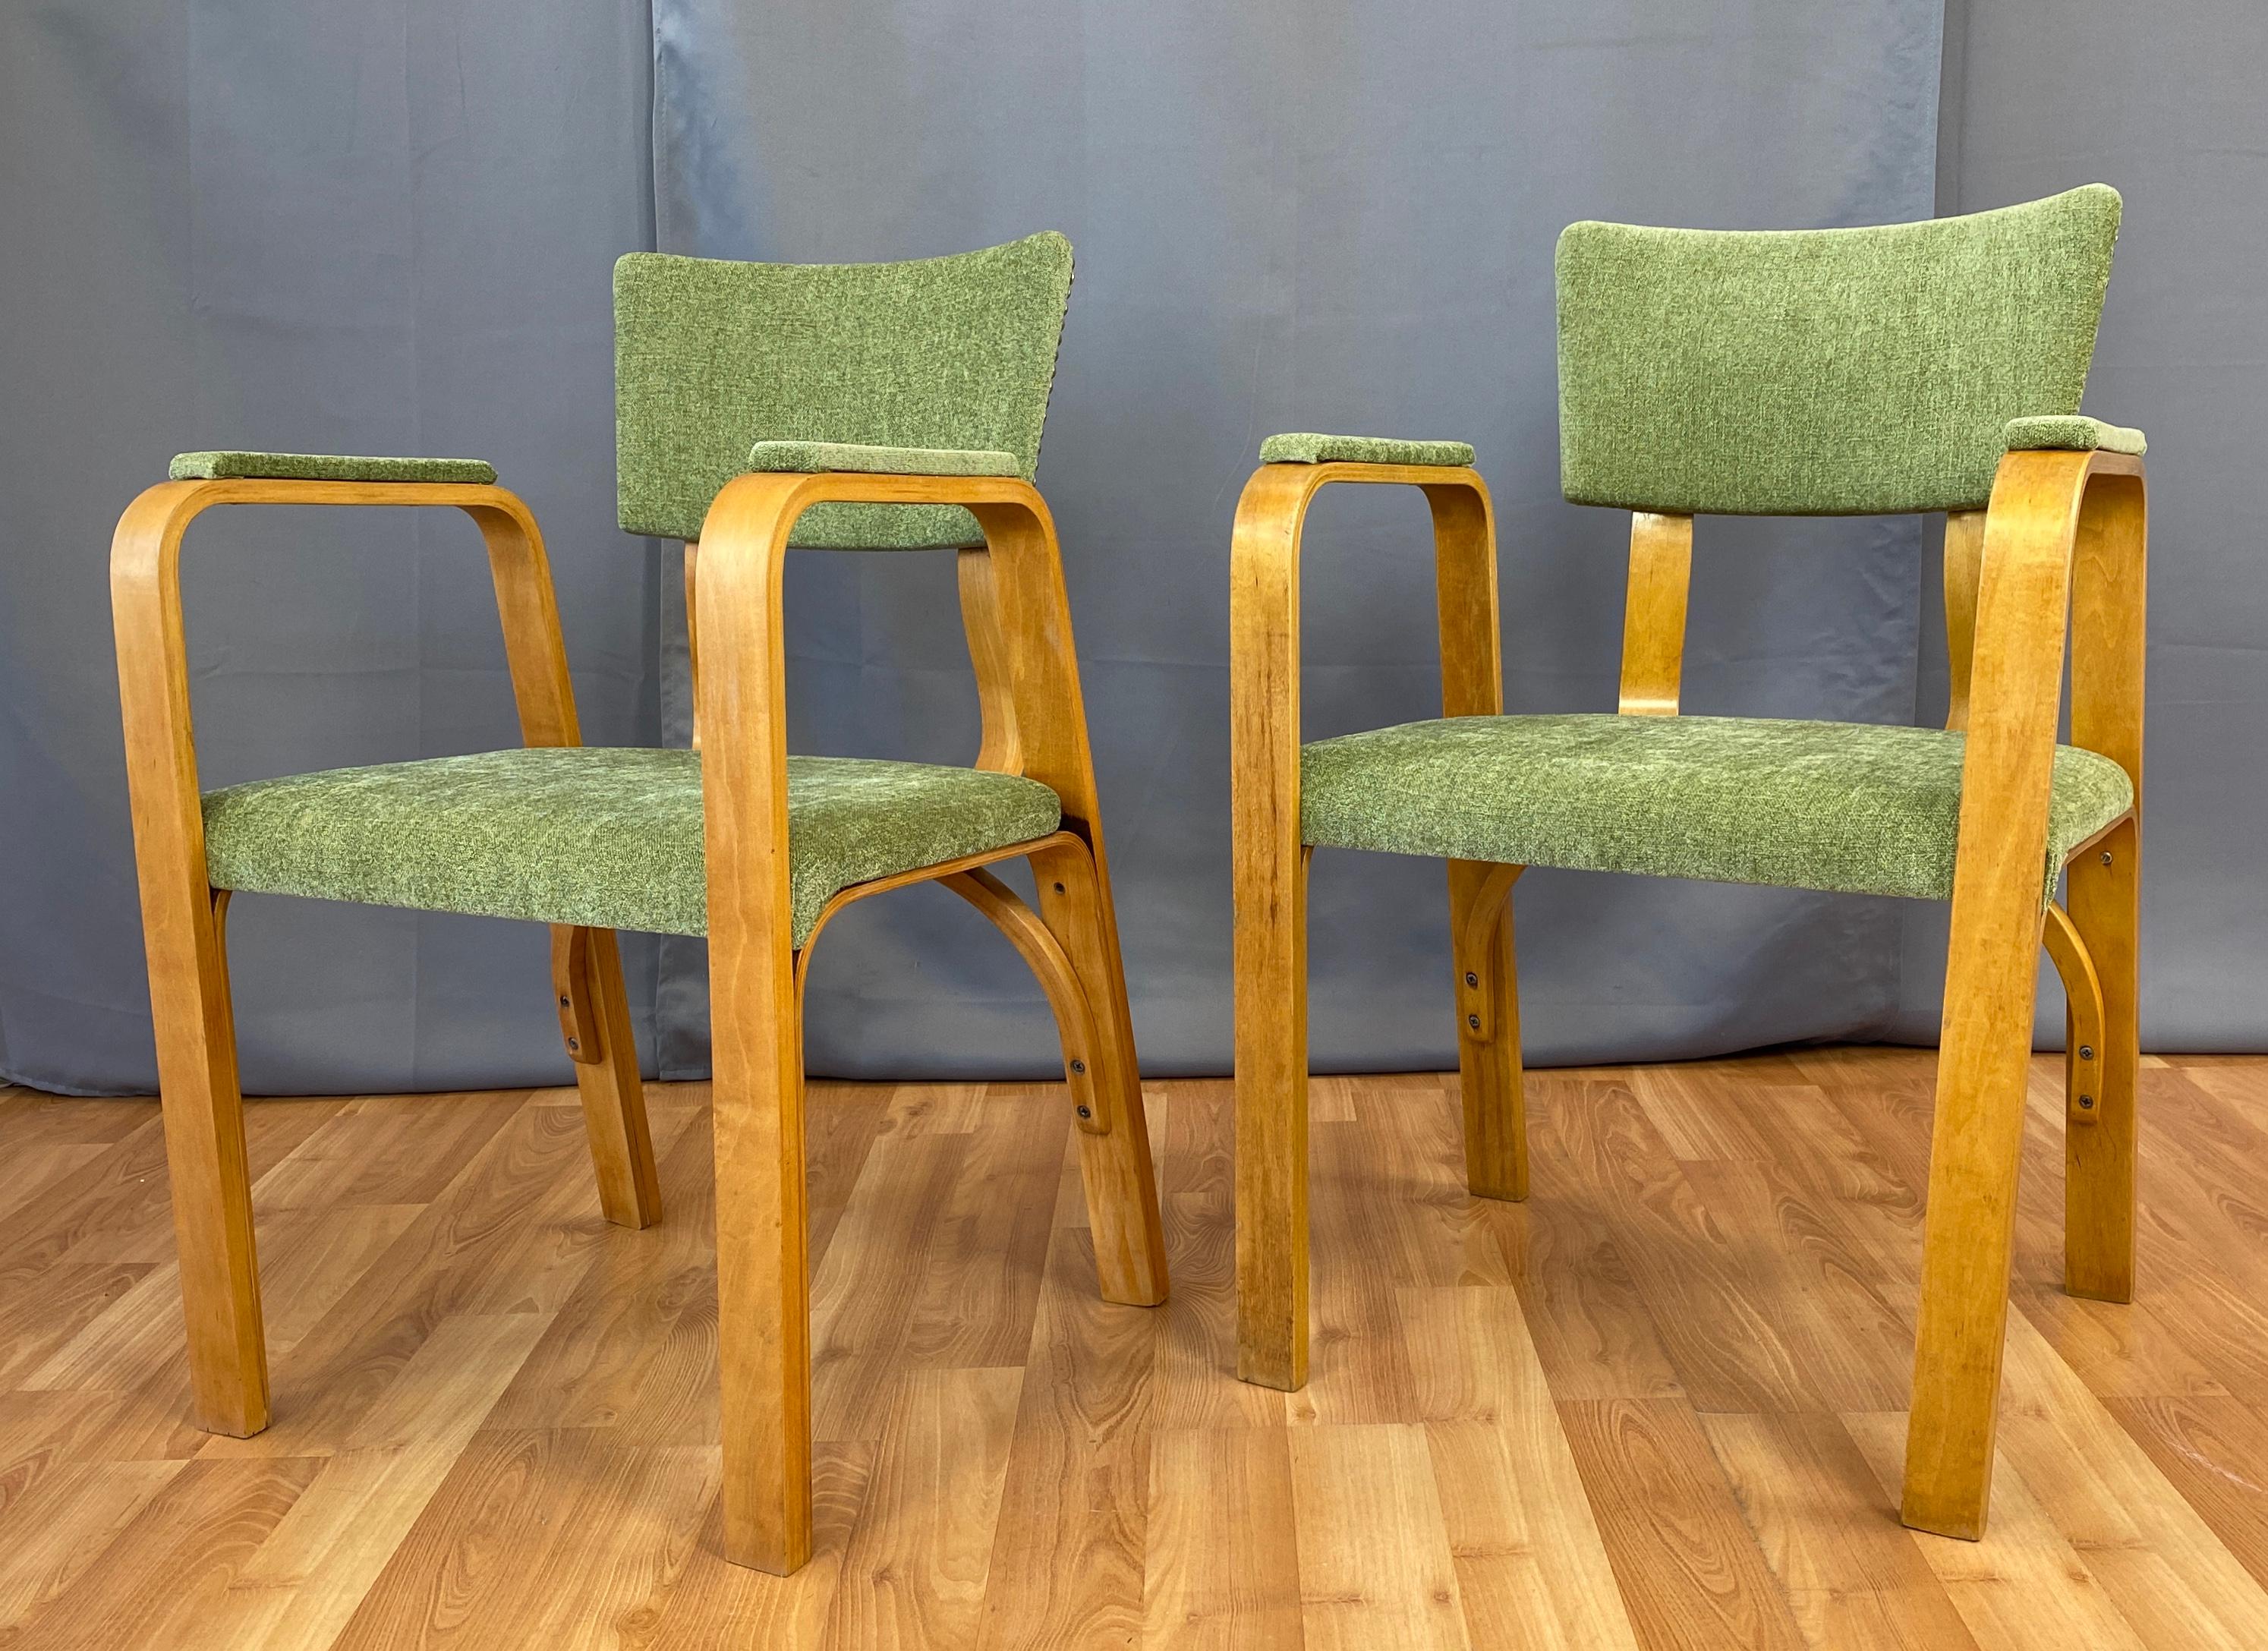 Offered here is a handsome pair of circa 1950s arm chairs by Thonet.
Bentwood frame, with new cotton blend upholstery, nail head detailing on backrest. 
Chairs frames look to have been recently refinished.